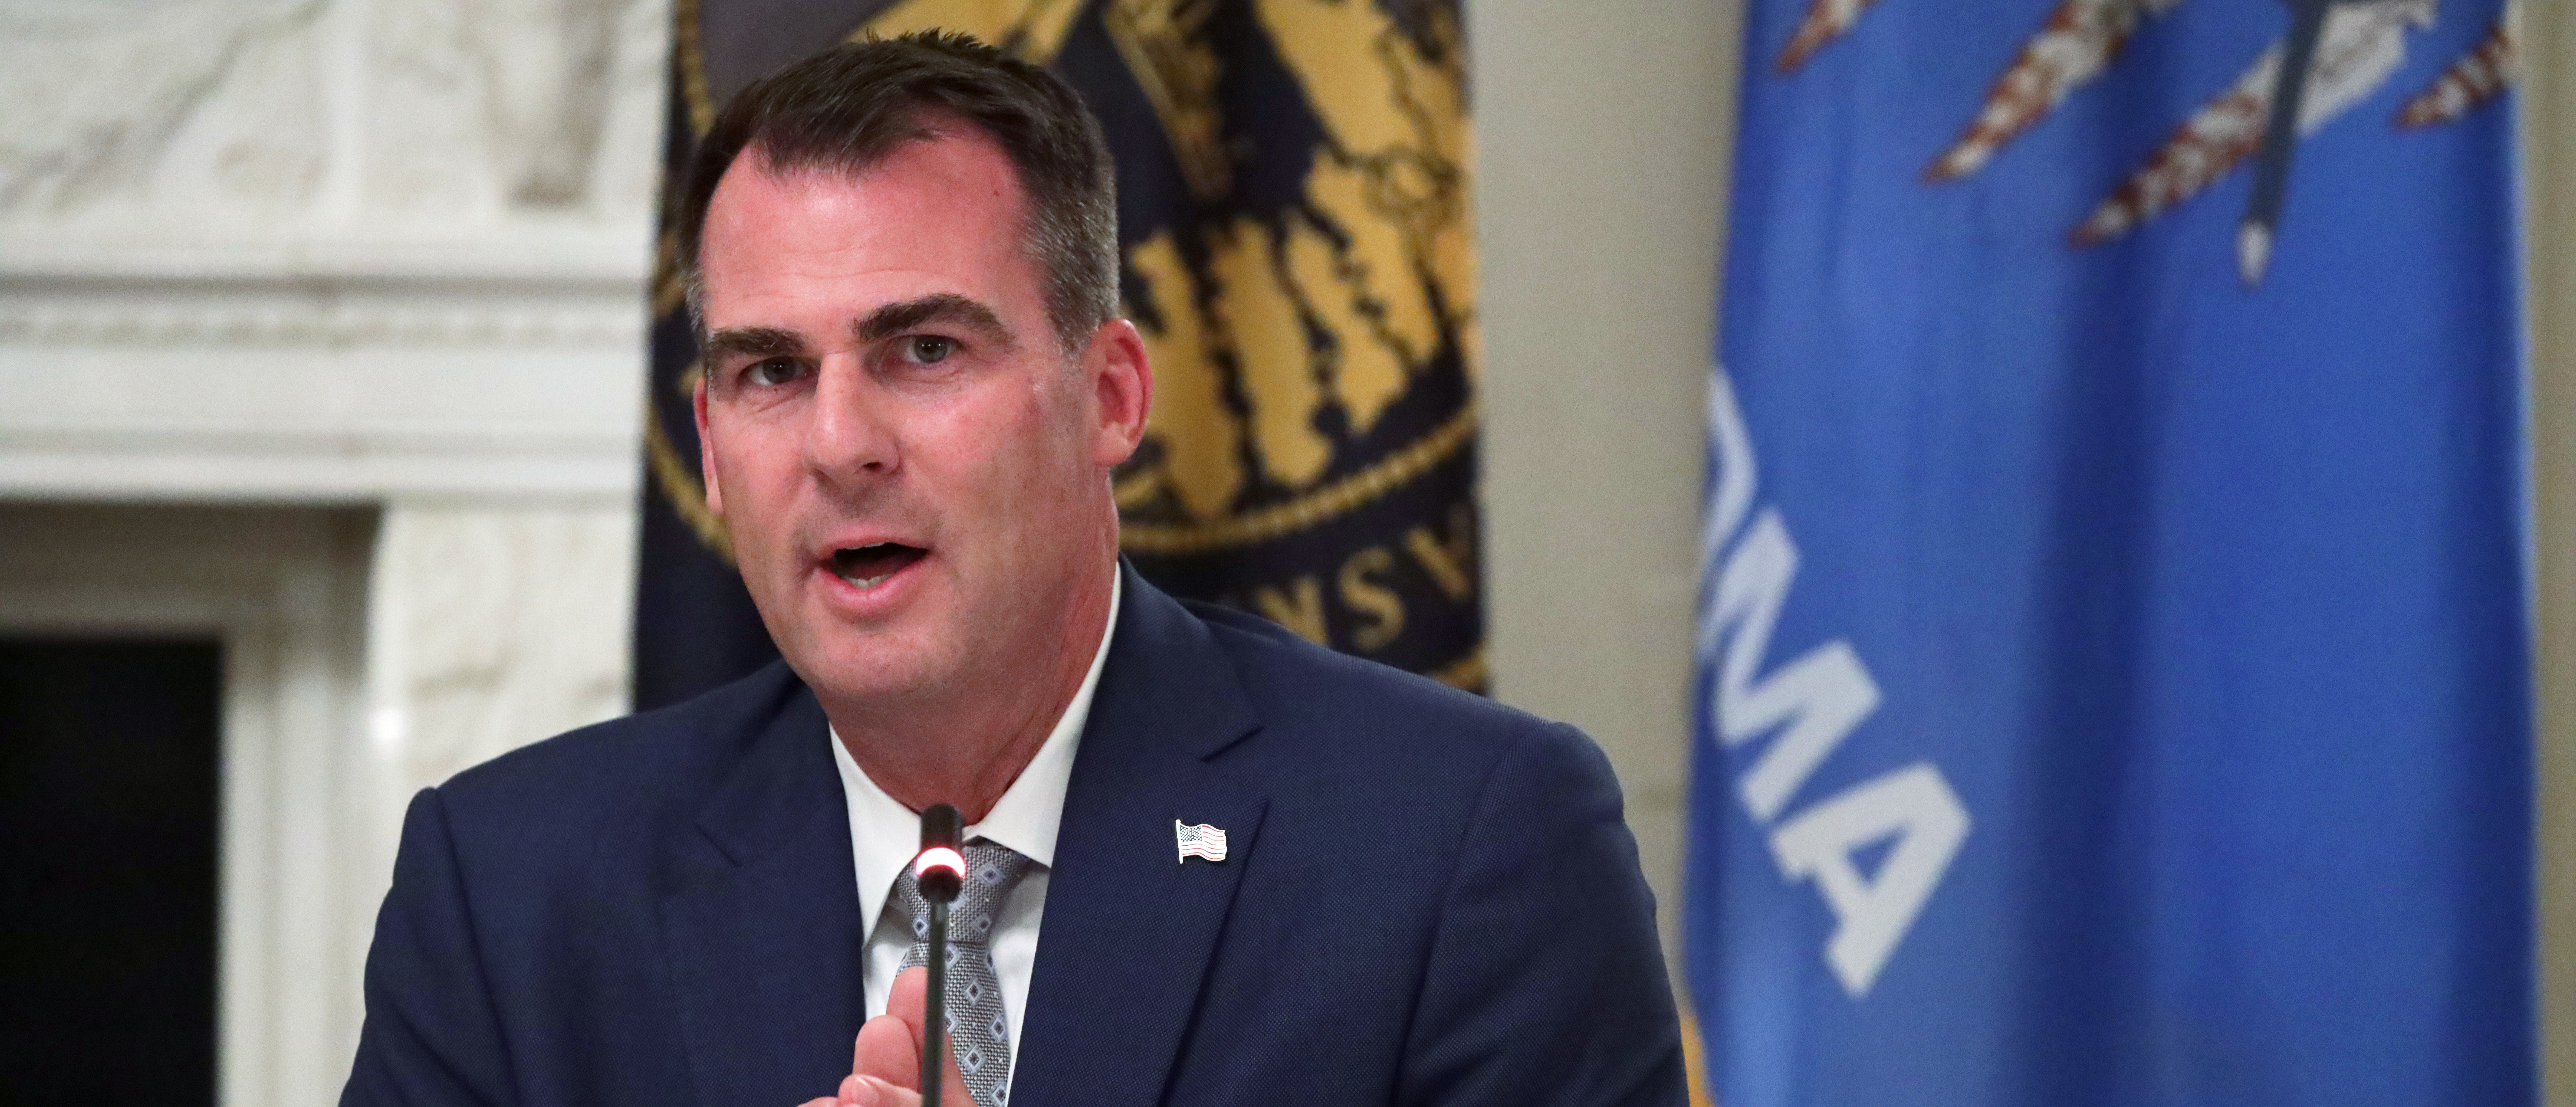 WASHINGTON, DC - JUNE 18: Governor Kevin Stitt (R-OK) speaks during a roundtable at the State Dining Room of the White House June 18, 2020 in Washington, DC. President Trump held a roundtable discussion with Governors and small business owners on the reopening of American’s small business. (Photo by Alex Wong/Getty Images)